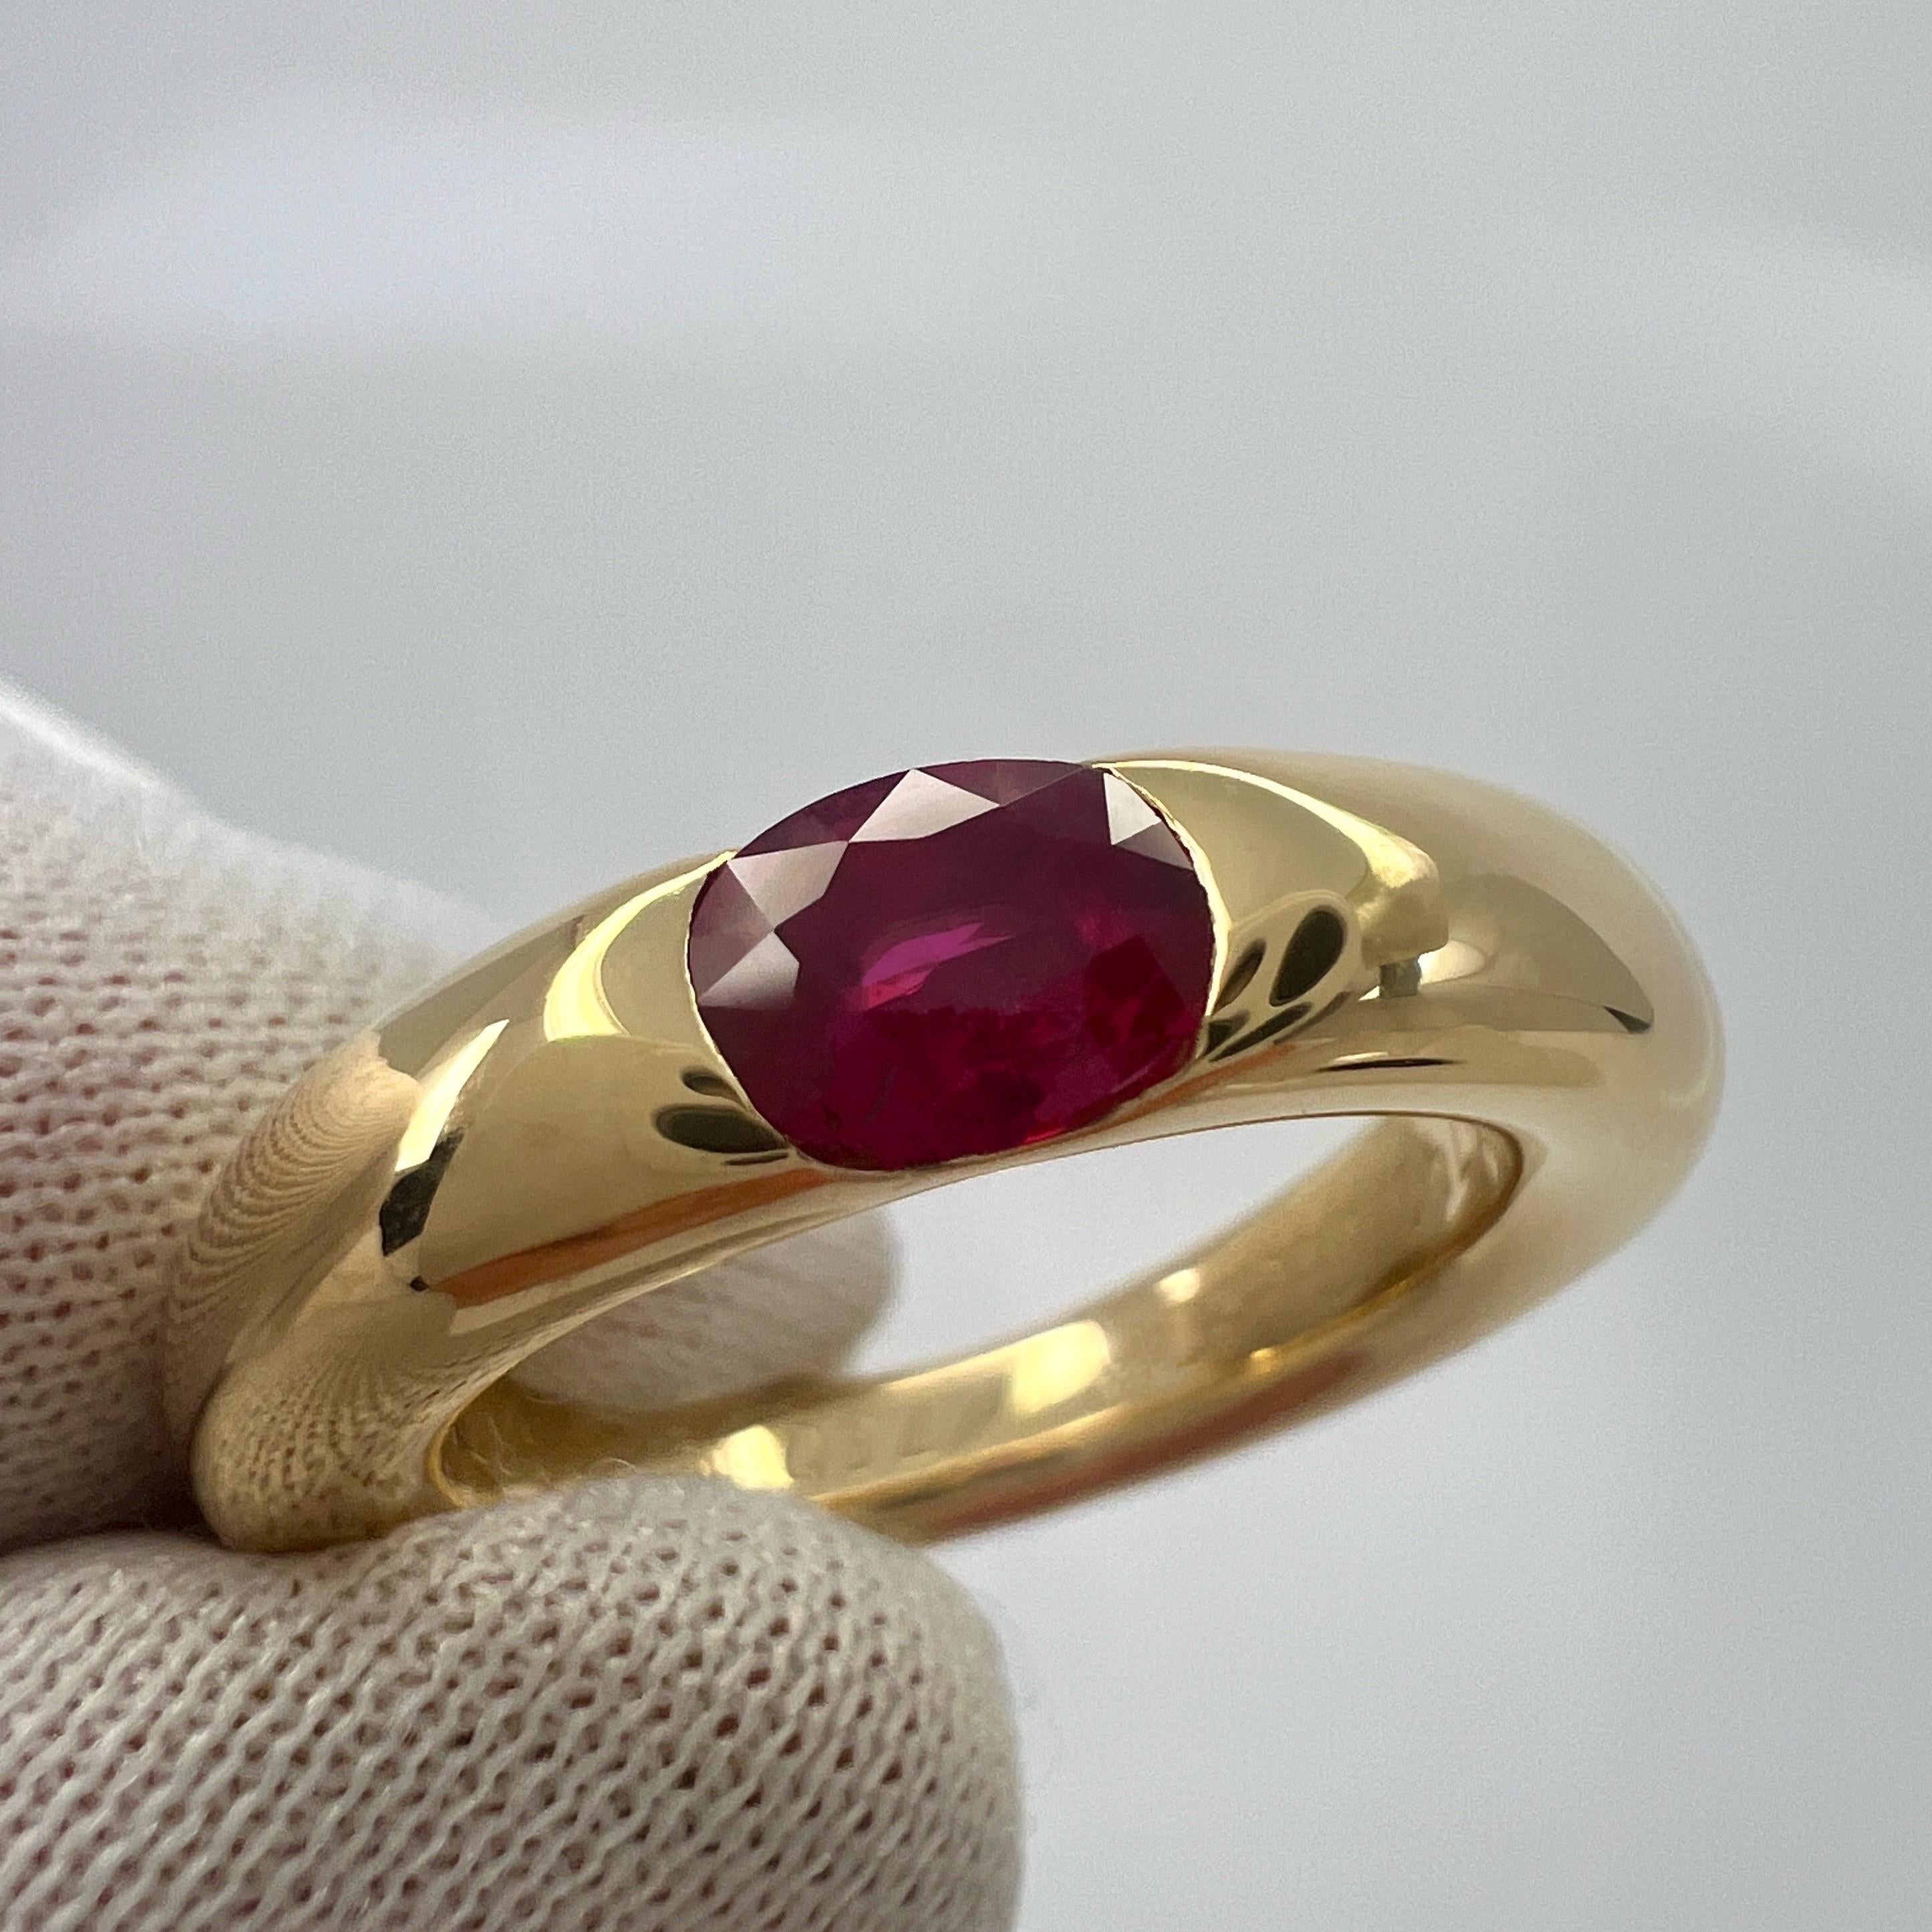 Vintage Cartier Vivid Red Ruby Ellipse 18k Gelbgold Oval Cut Solitaire Ring 5